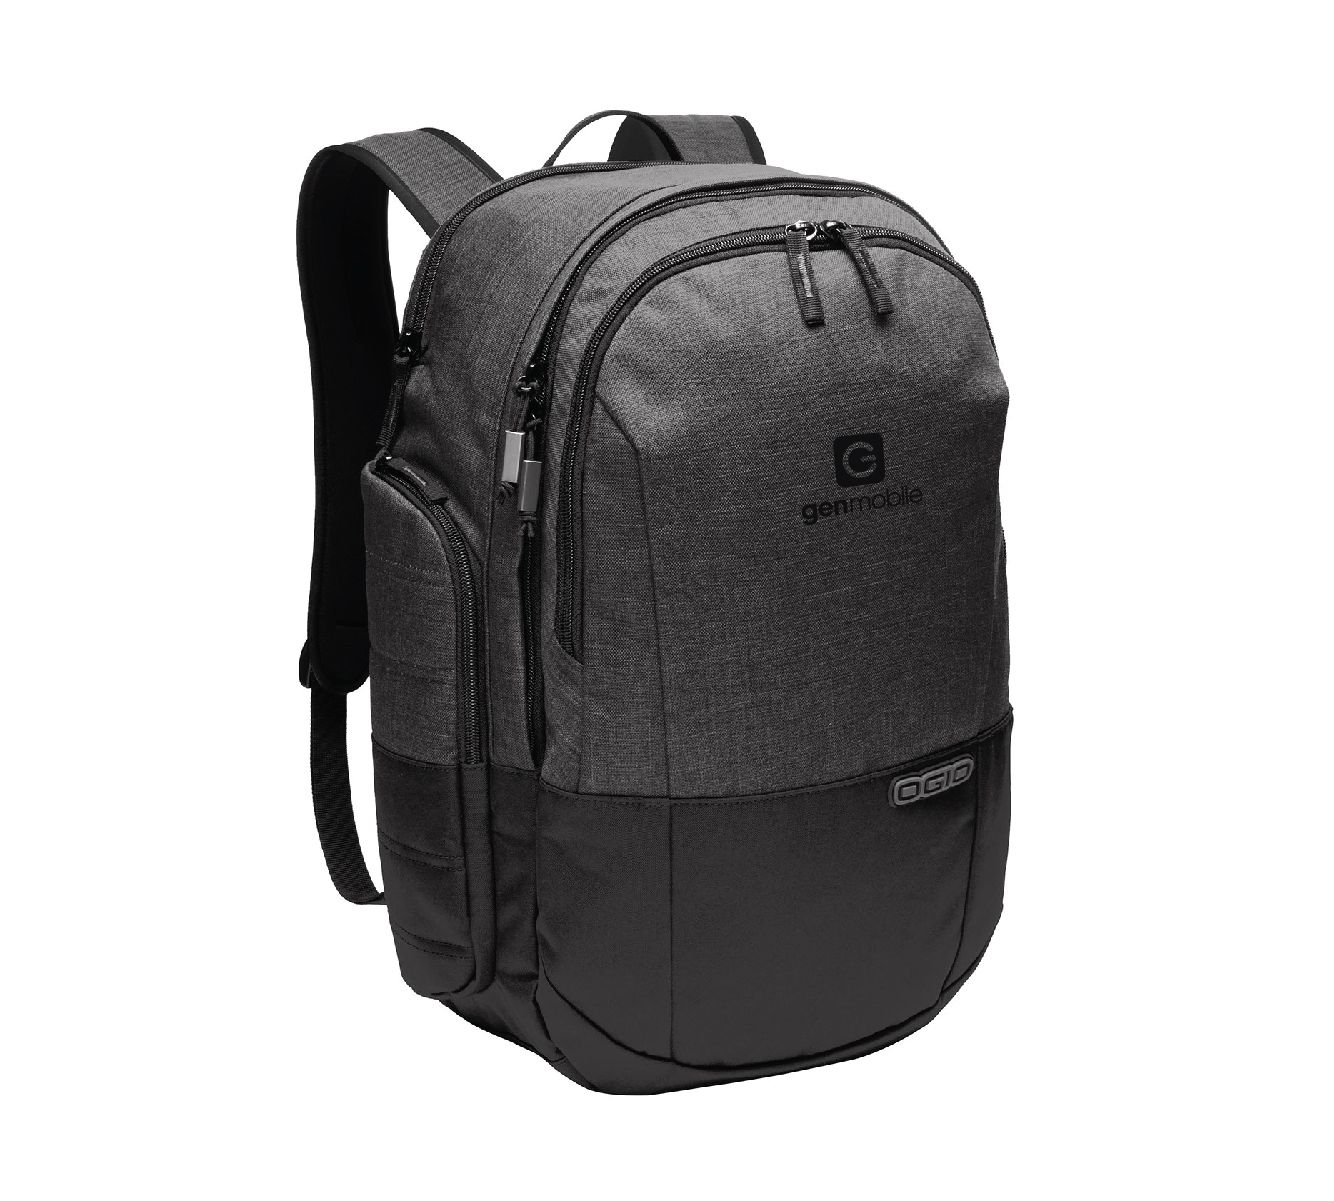 OGIO Rockwell Pack with Gen Mobile Logo